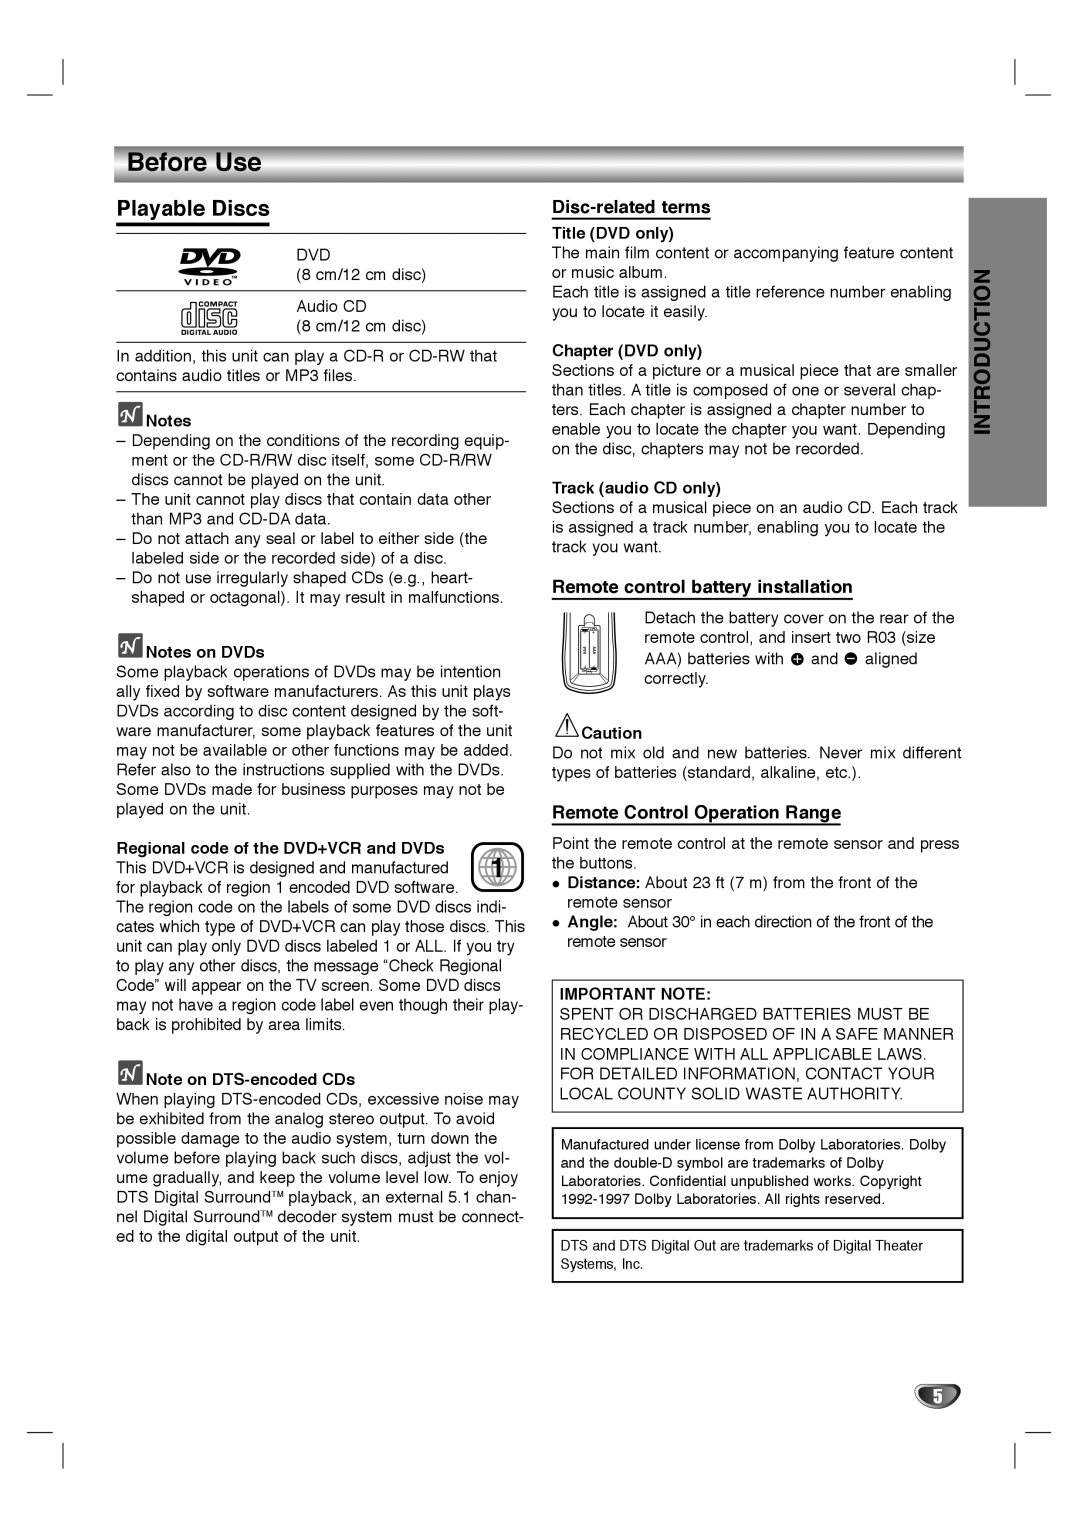 Sanyo SCP-2700 instruction manual Before Use, Playable Discs, Disc-related terms, Remote control battery installation 